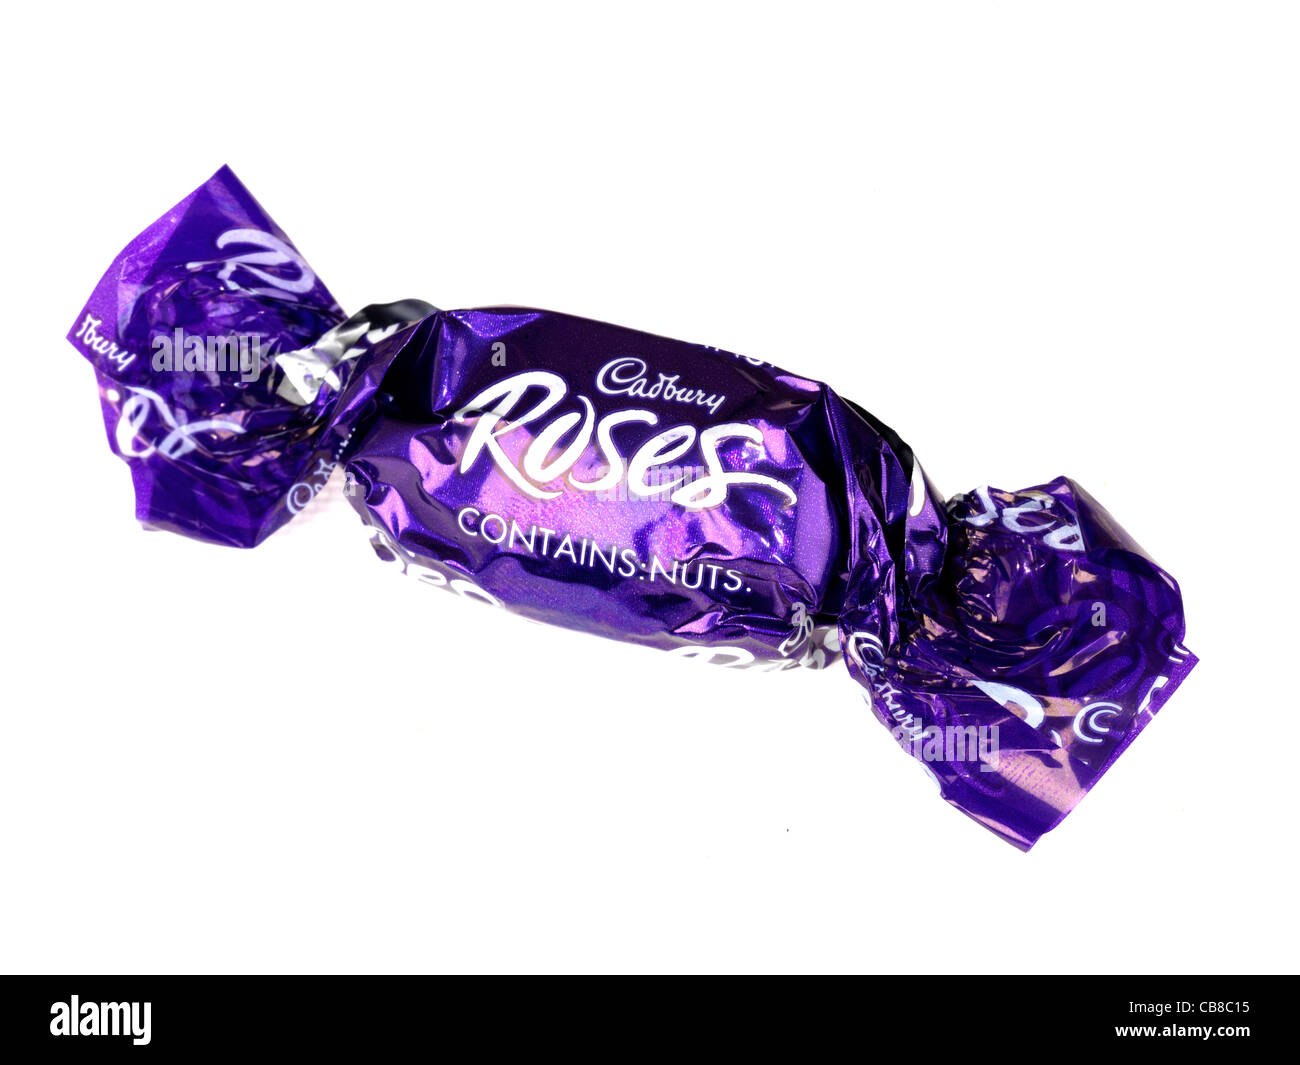 Popular Roses Chocolates Confectionery In Branded Sweet Wrappers Ready To Unwrap And Eat Isolated Against A White Background With A Clipping Path Stock Photo